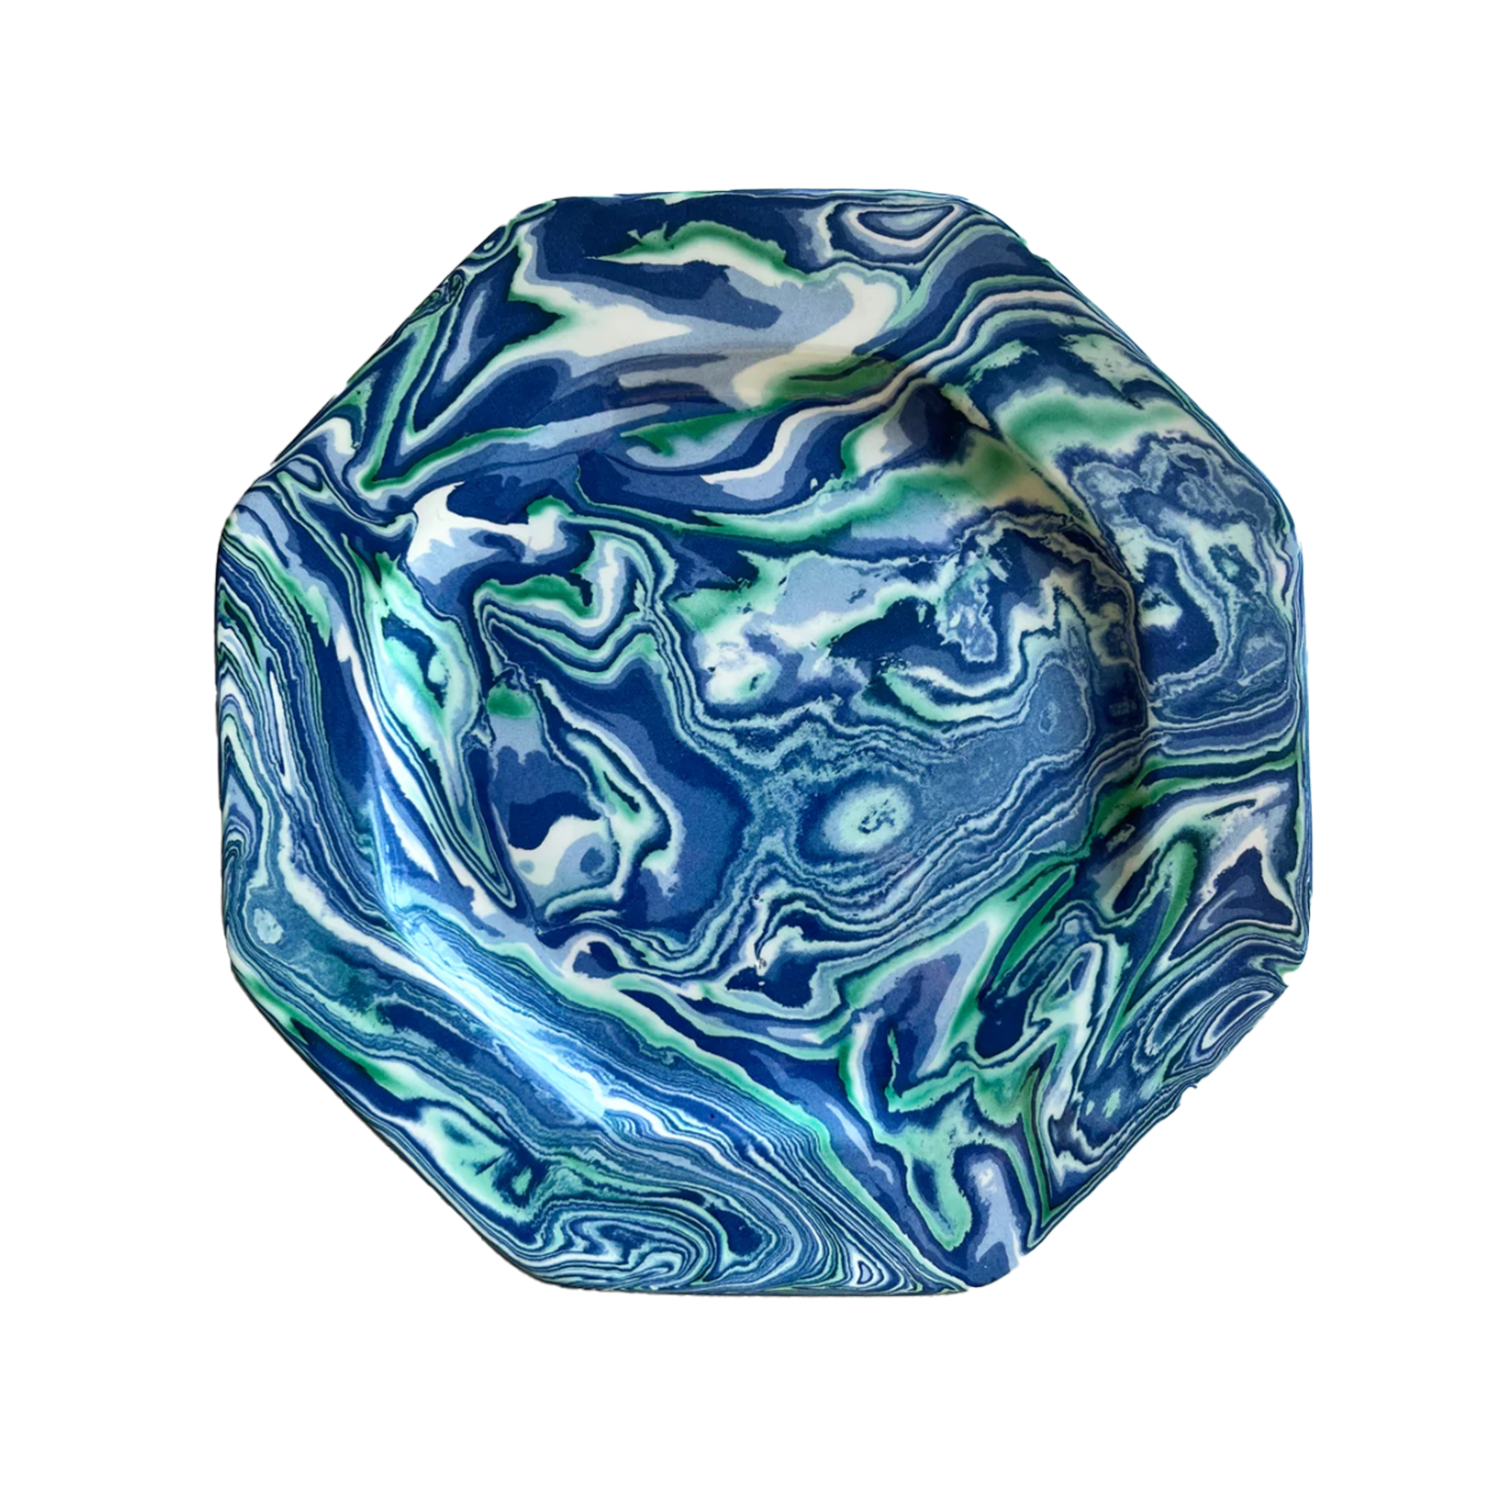 hectagon plate with blue and green marble swirls